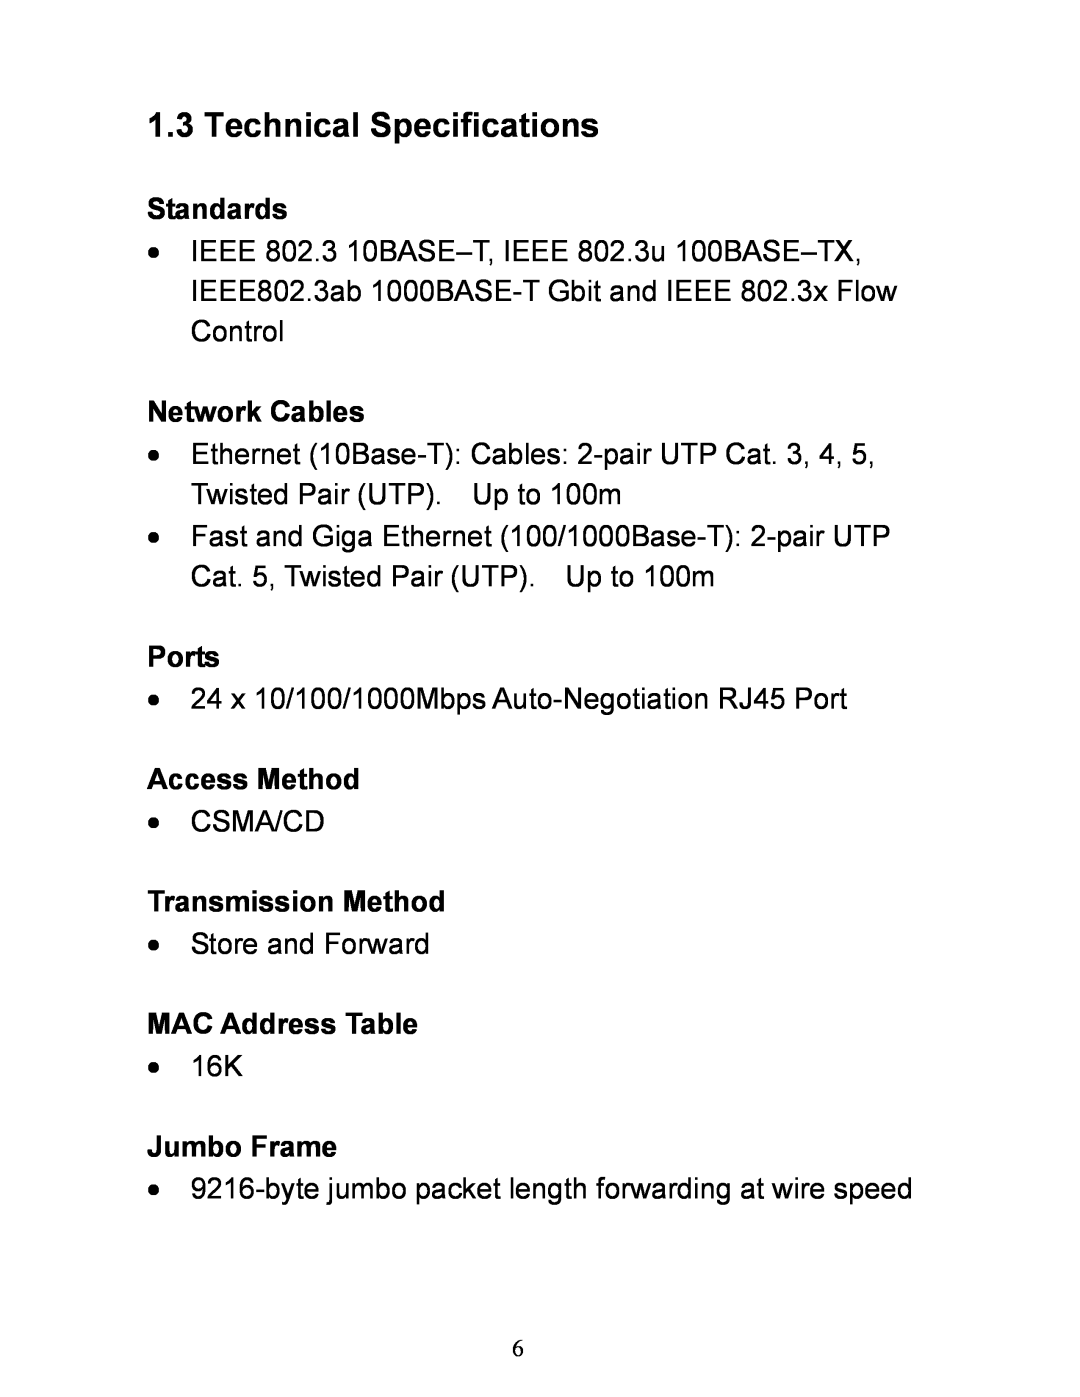 Airlink101 AGSW2400 manual Technical Specifications, Standards, Network Cables, Ports, Access Method, Transmission Method 